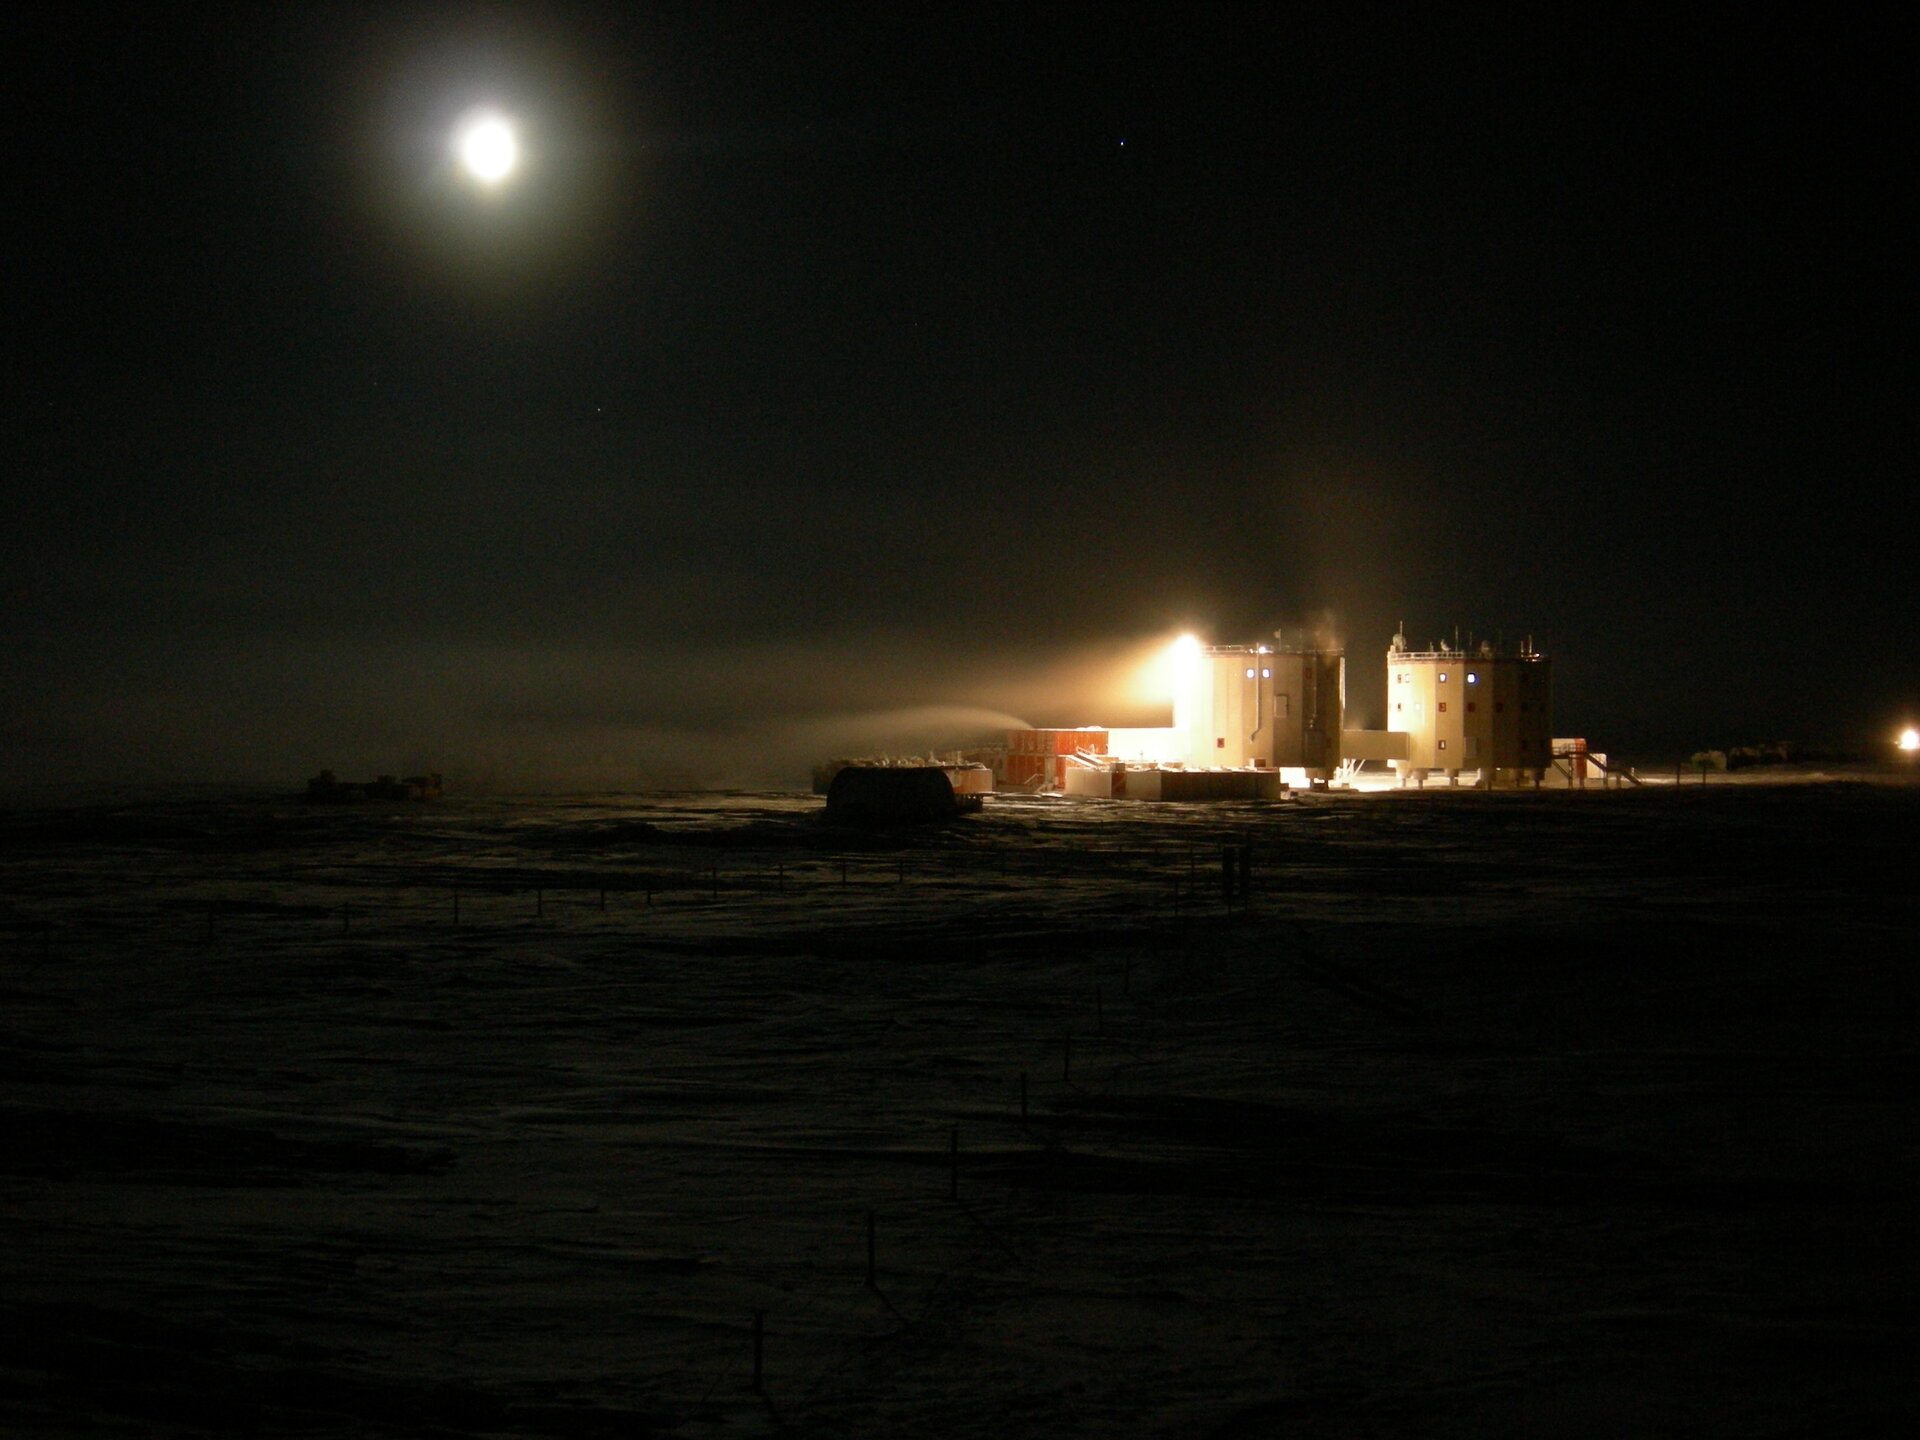 Concordia research station in moonlight